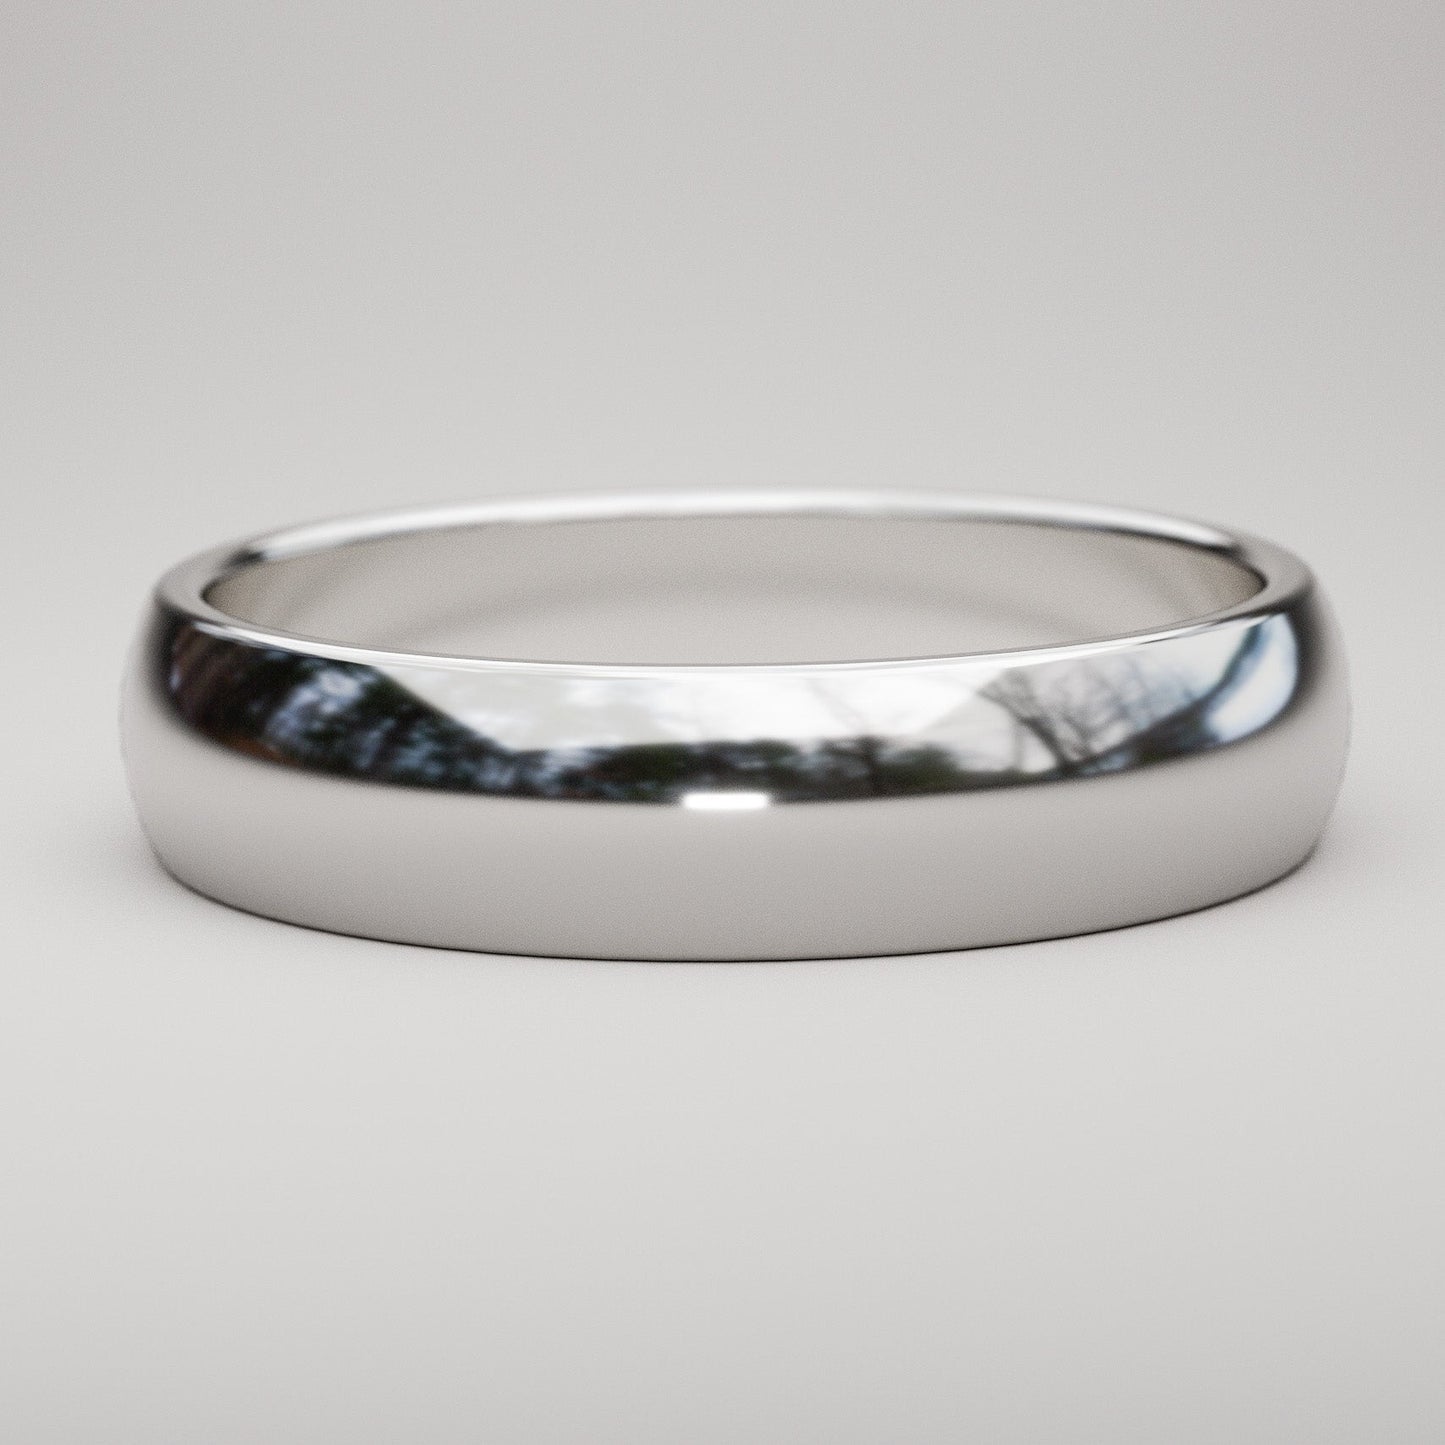 5mm wide simple wedding ring in 14k white gold